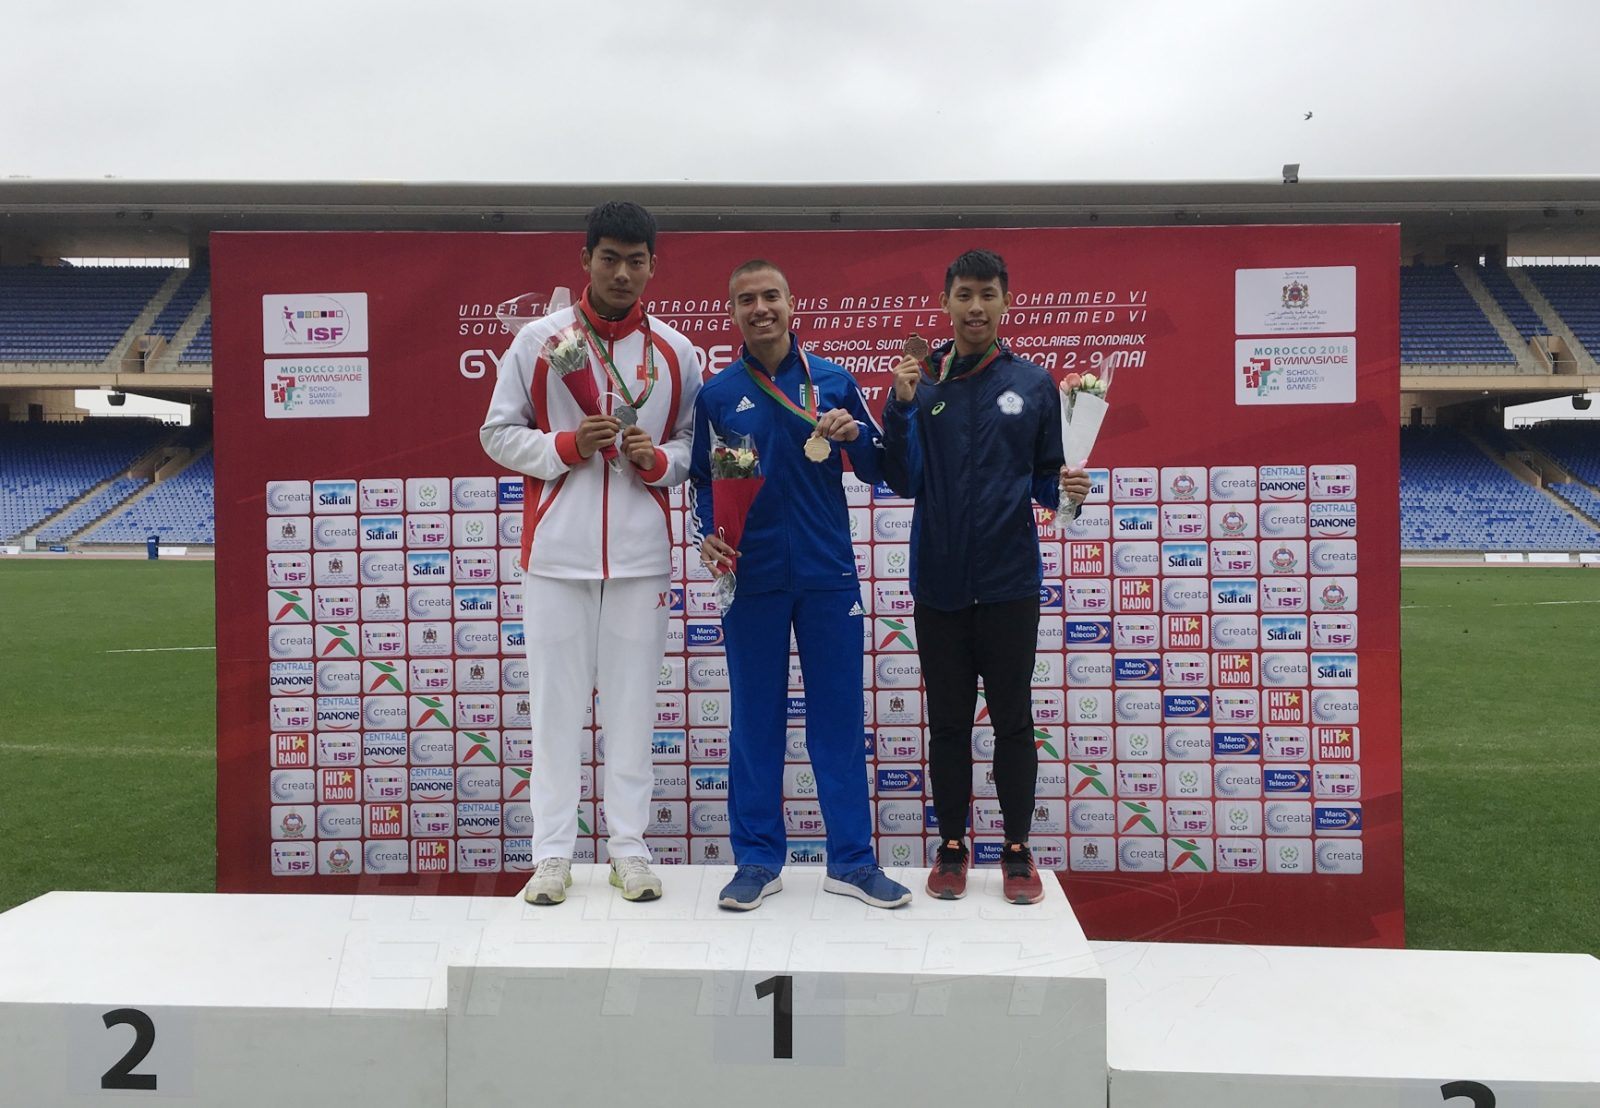 Ioannis Granitsiotis of Greece (C) flanked by Tai An of China and Yu-Sian Lin of Chinese Taipei on the podium after the Boys 100m medal presentation at Gymnasiade 2018 in Marrakech / Photo Credit: Yomi Omogbeja